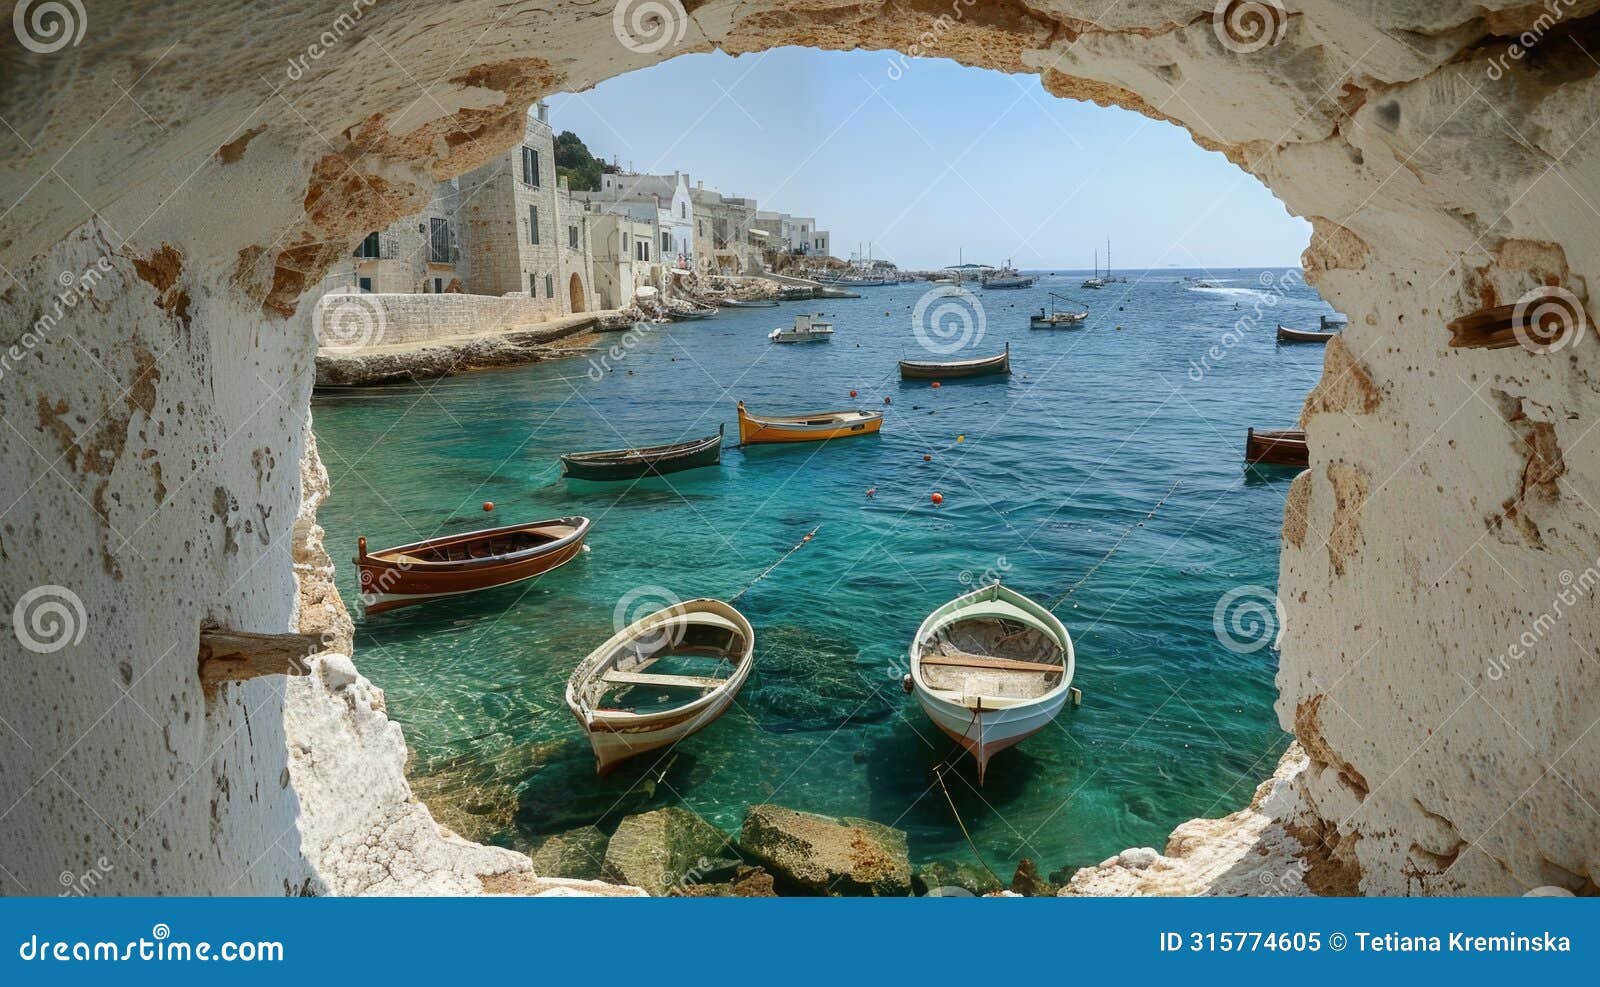 historical harbor view through a deep blue hole in a stark white wall